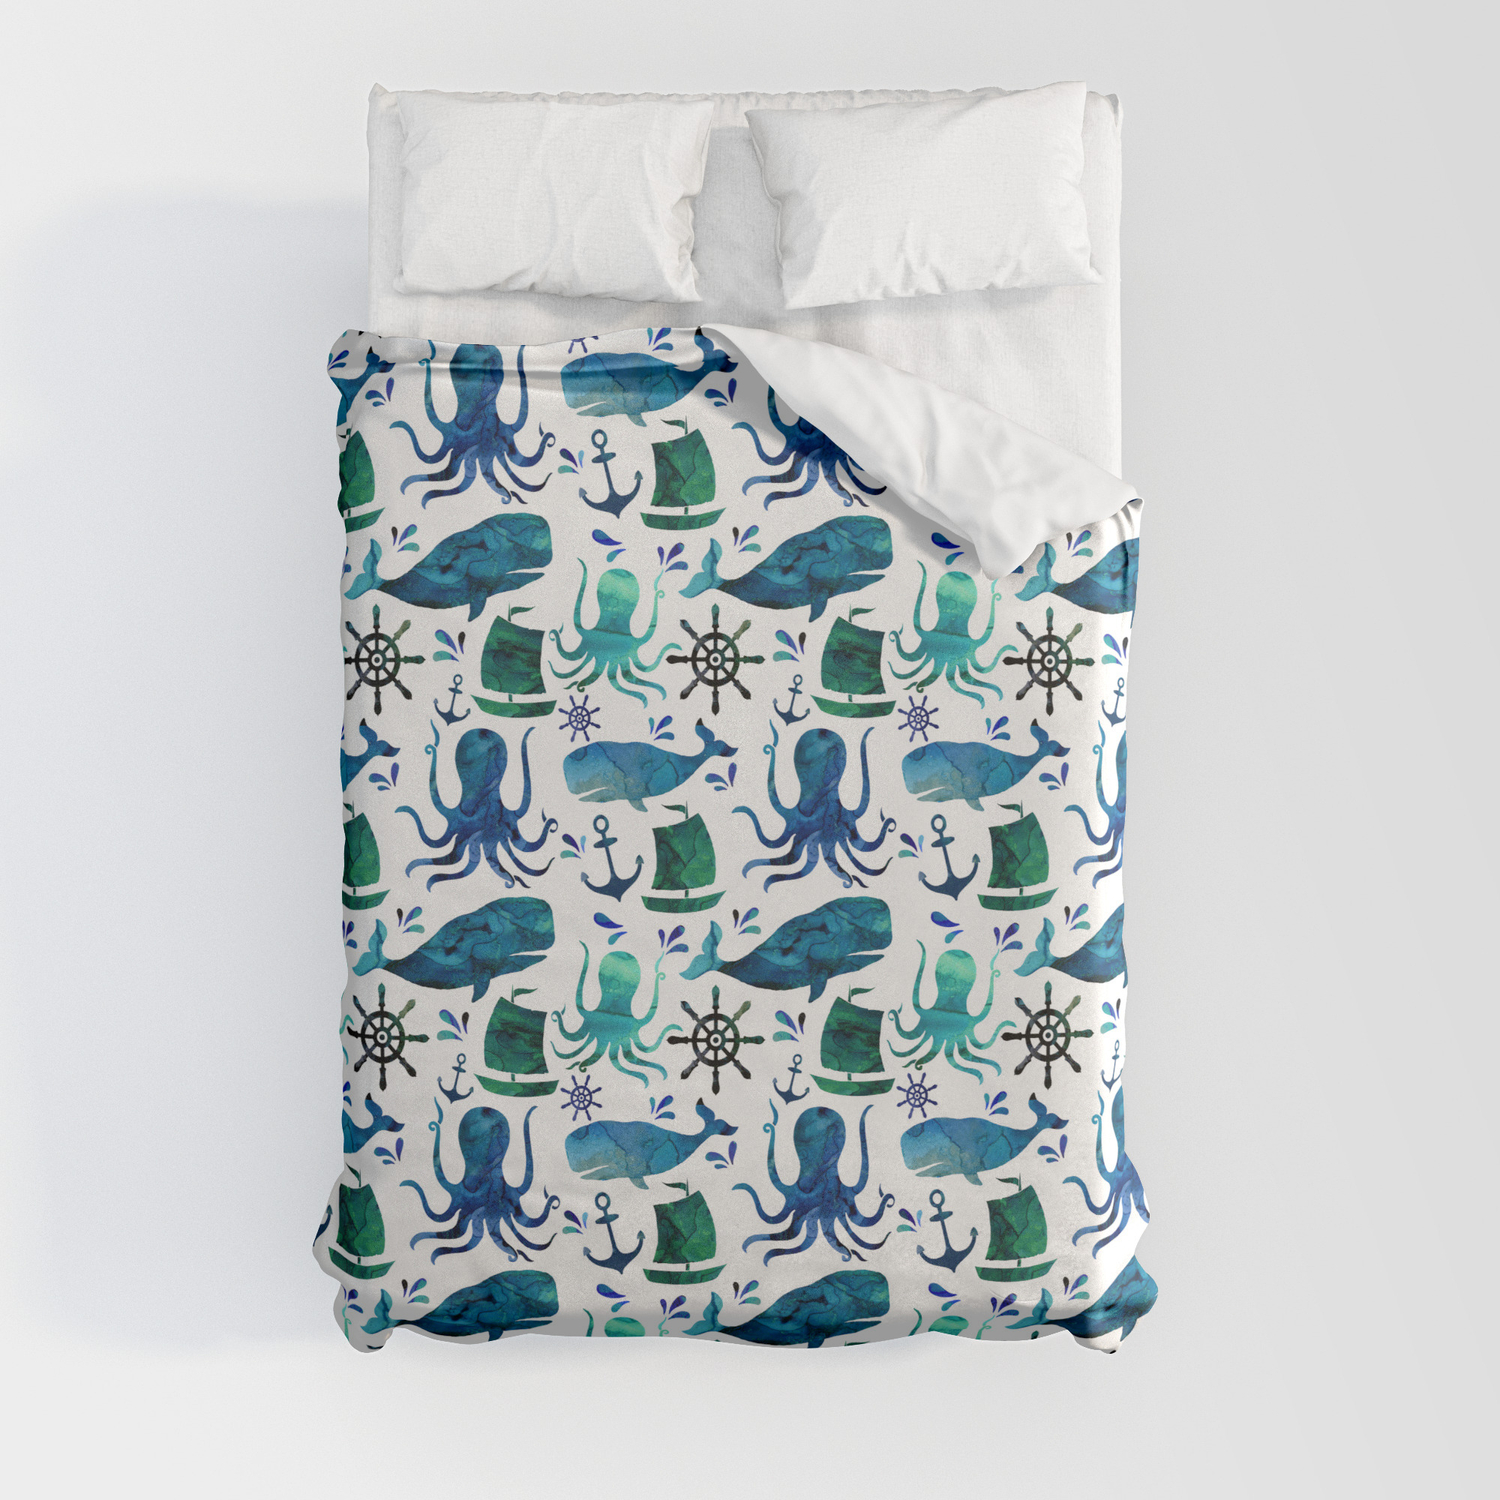 Watercolor Ocean Nautical Octopus Whale Pattern by Sam Ann Designs on Synthetic Duvet Covers